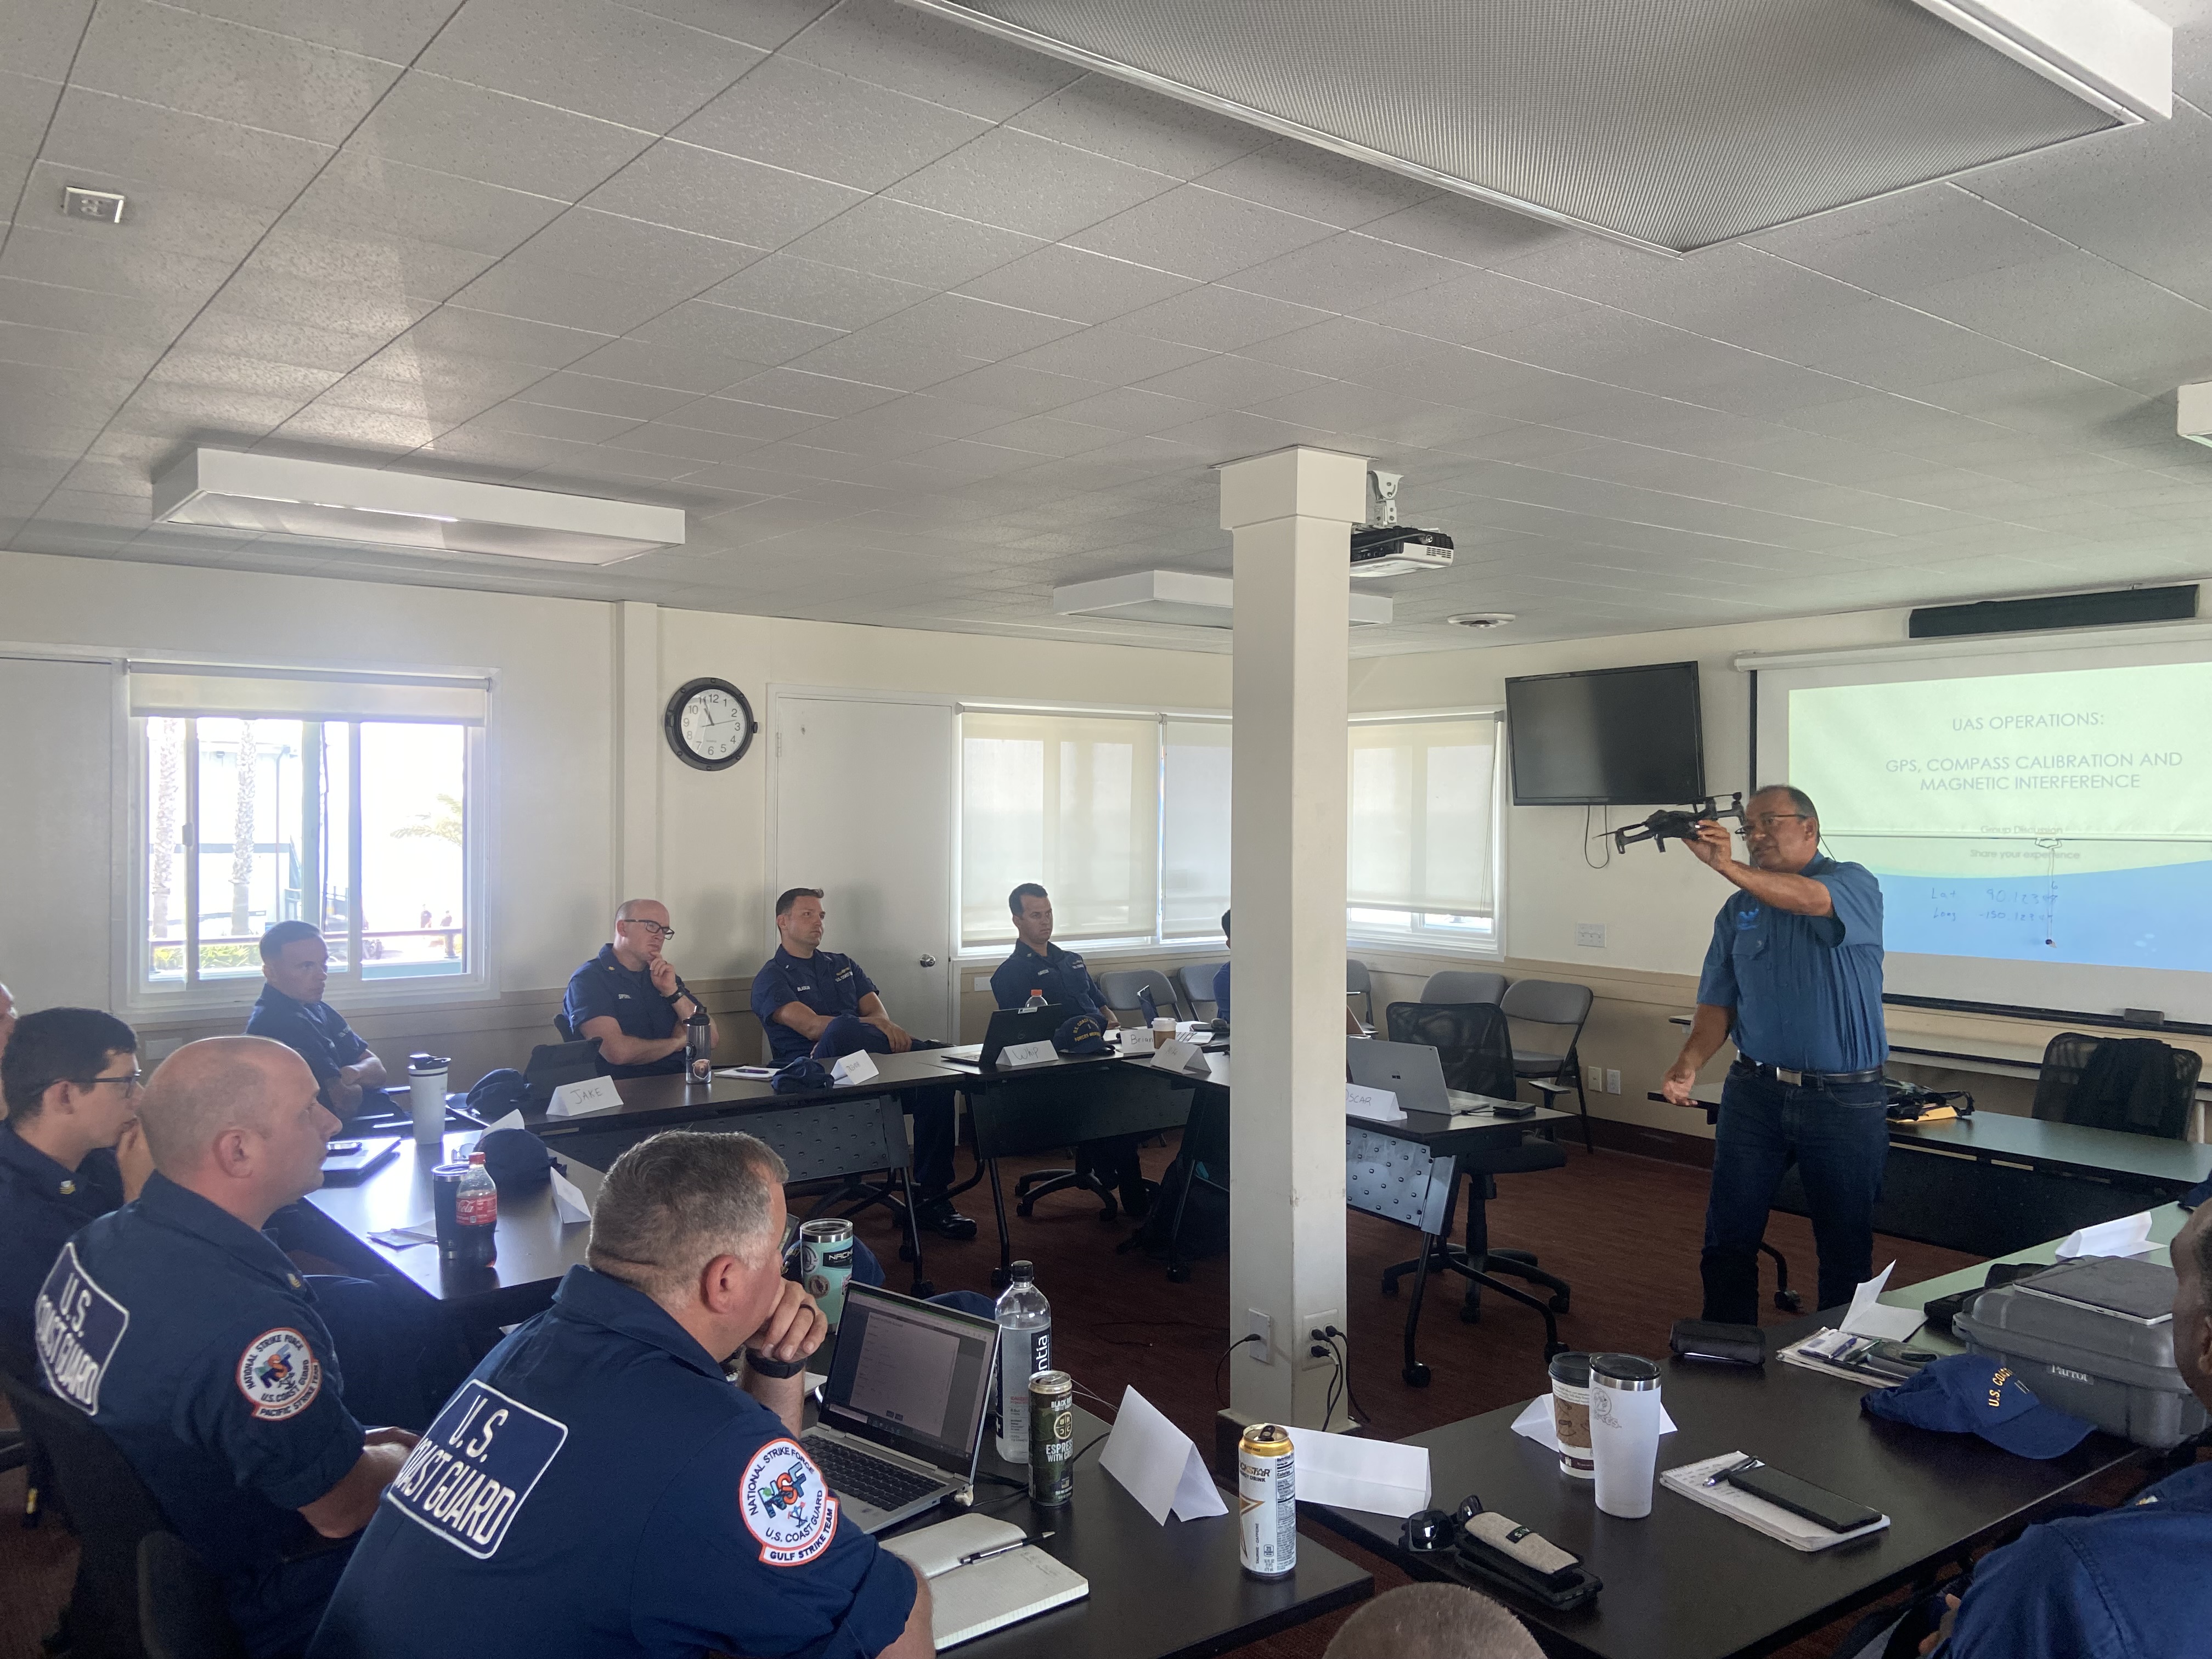 Flight instructor, Dr. Oscar Garcia-Pineda, leads ground school for UAS training team consisting of USCG UAS pilots and representatives from OR&R, USCG, and the Couvillion Group (Image Credit: NOAA). 